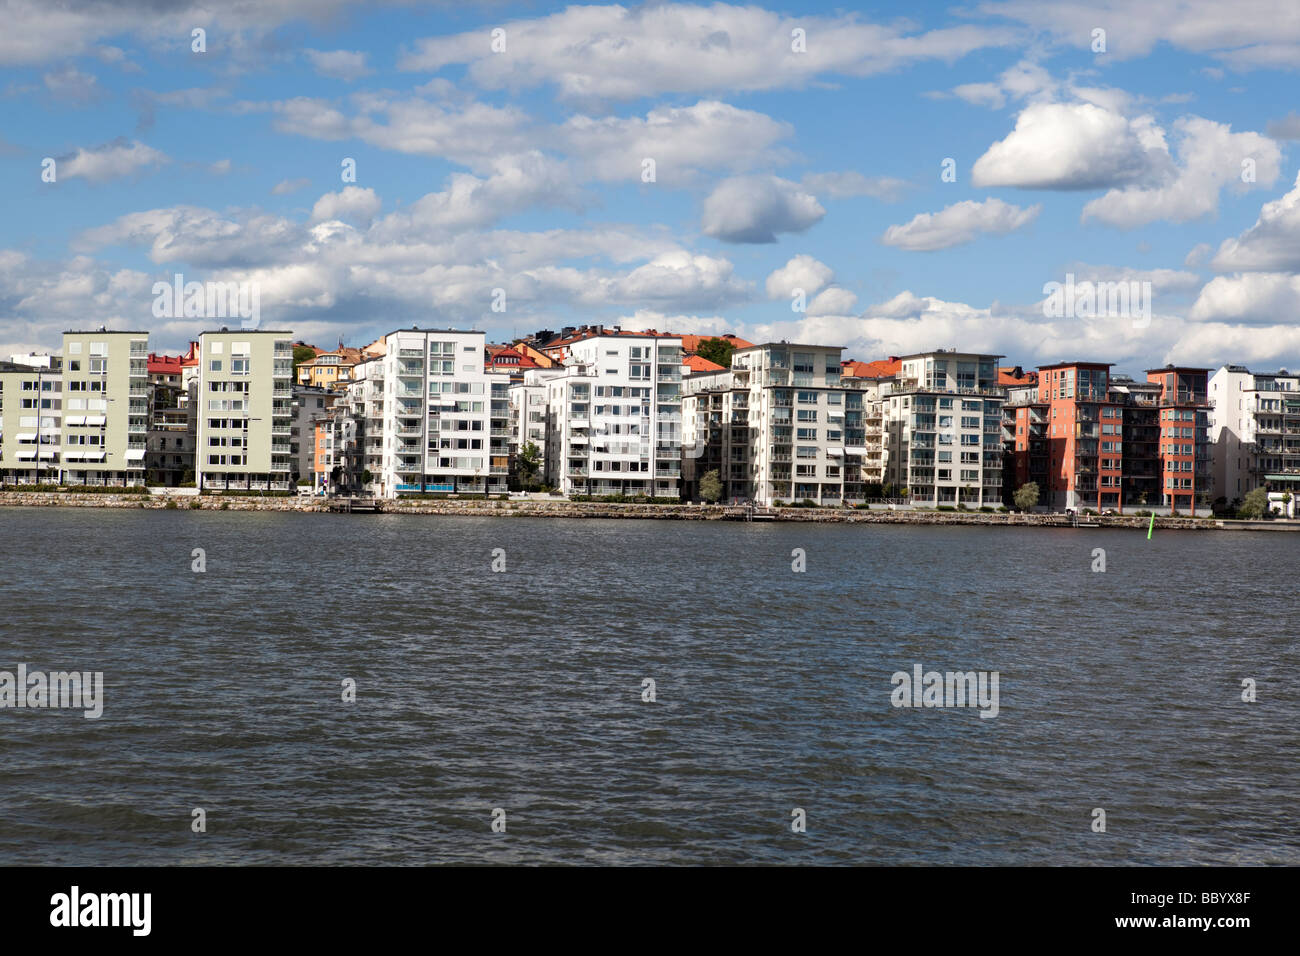 New seafront apartments at Lilla Essingen Stock Photo